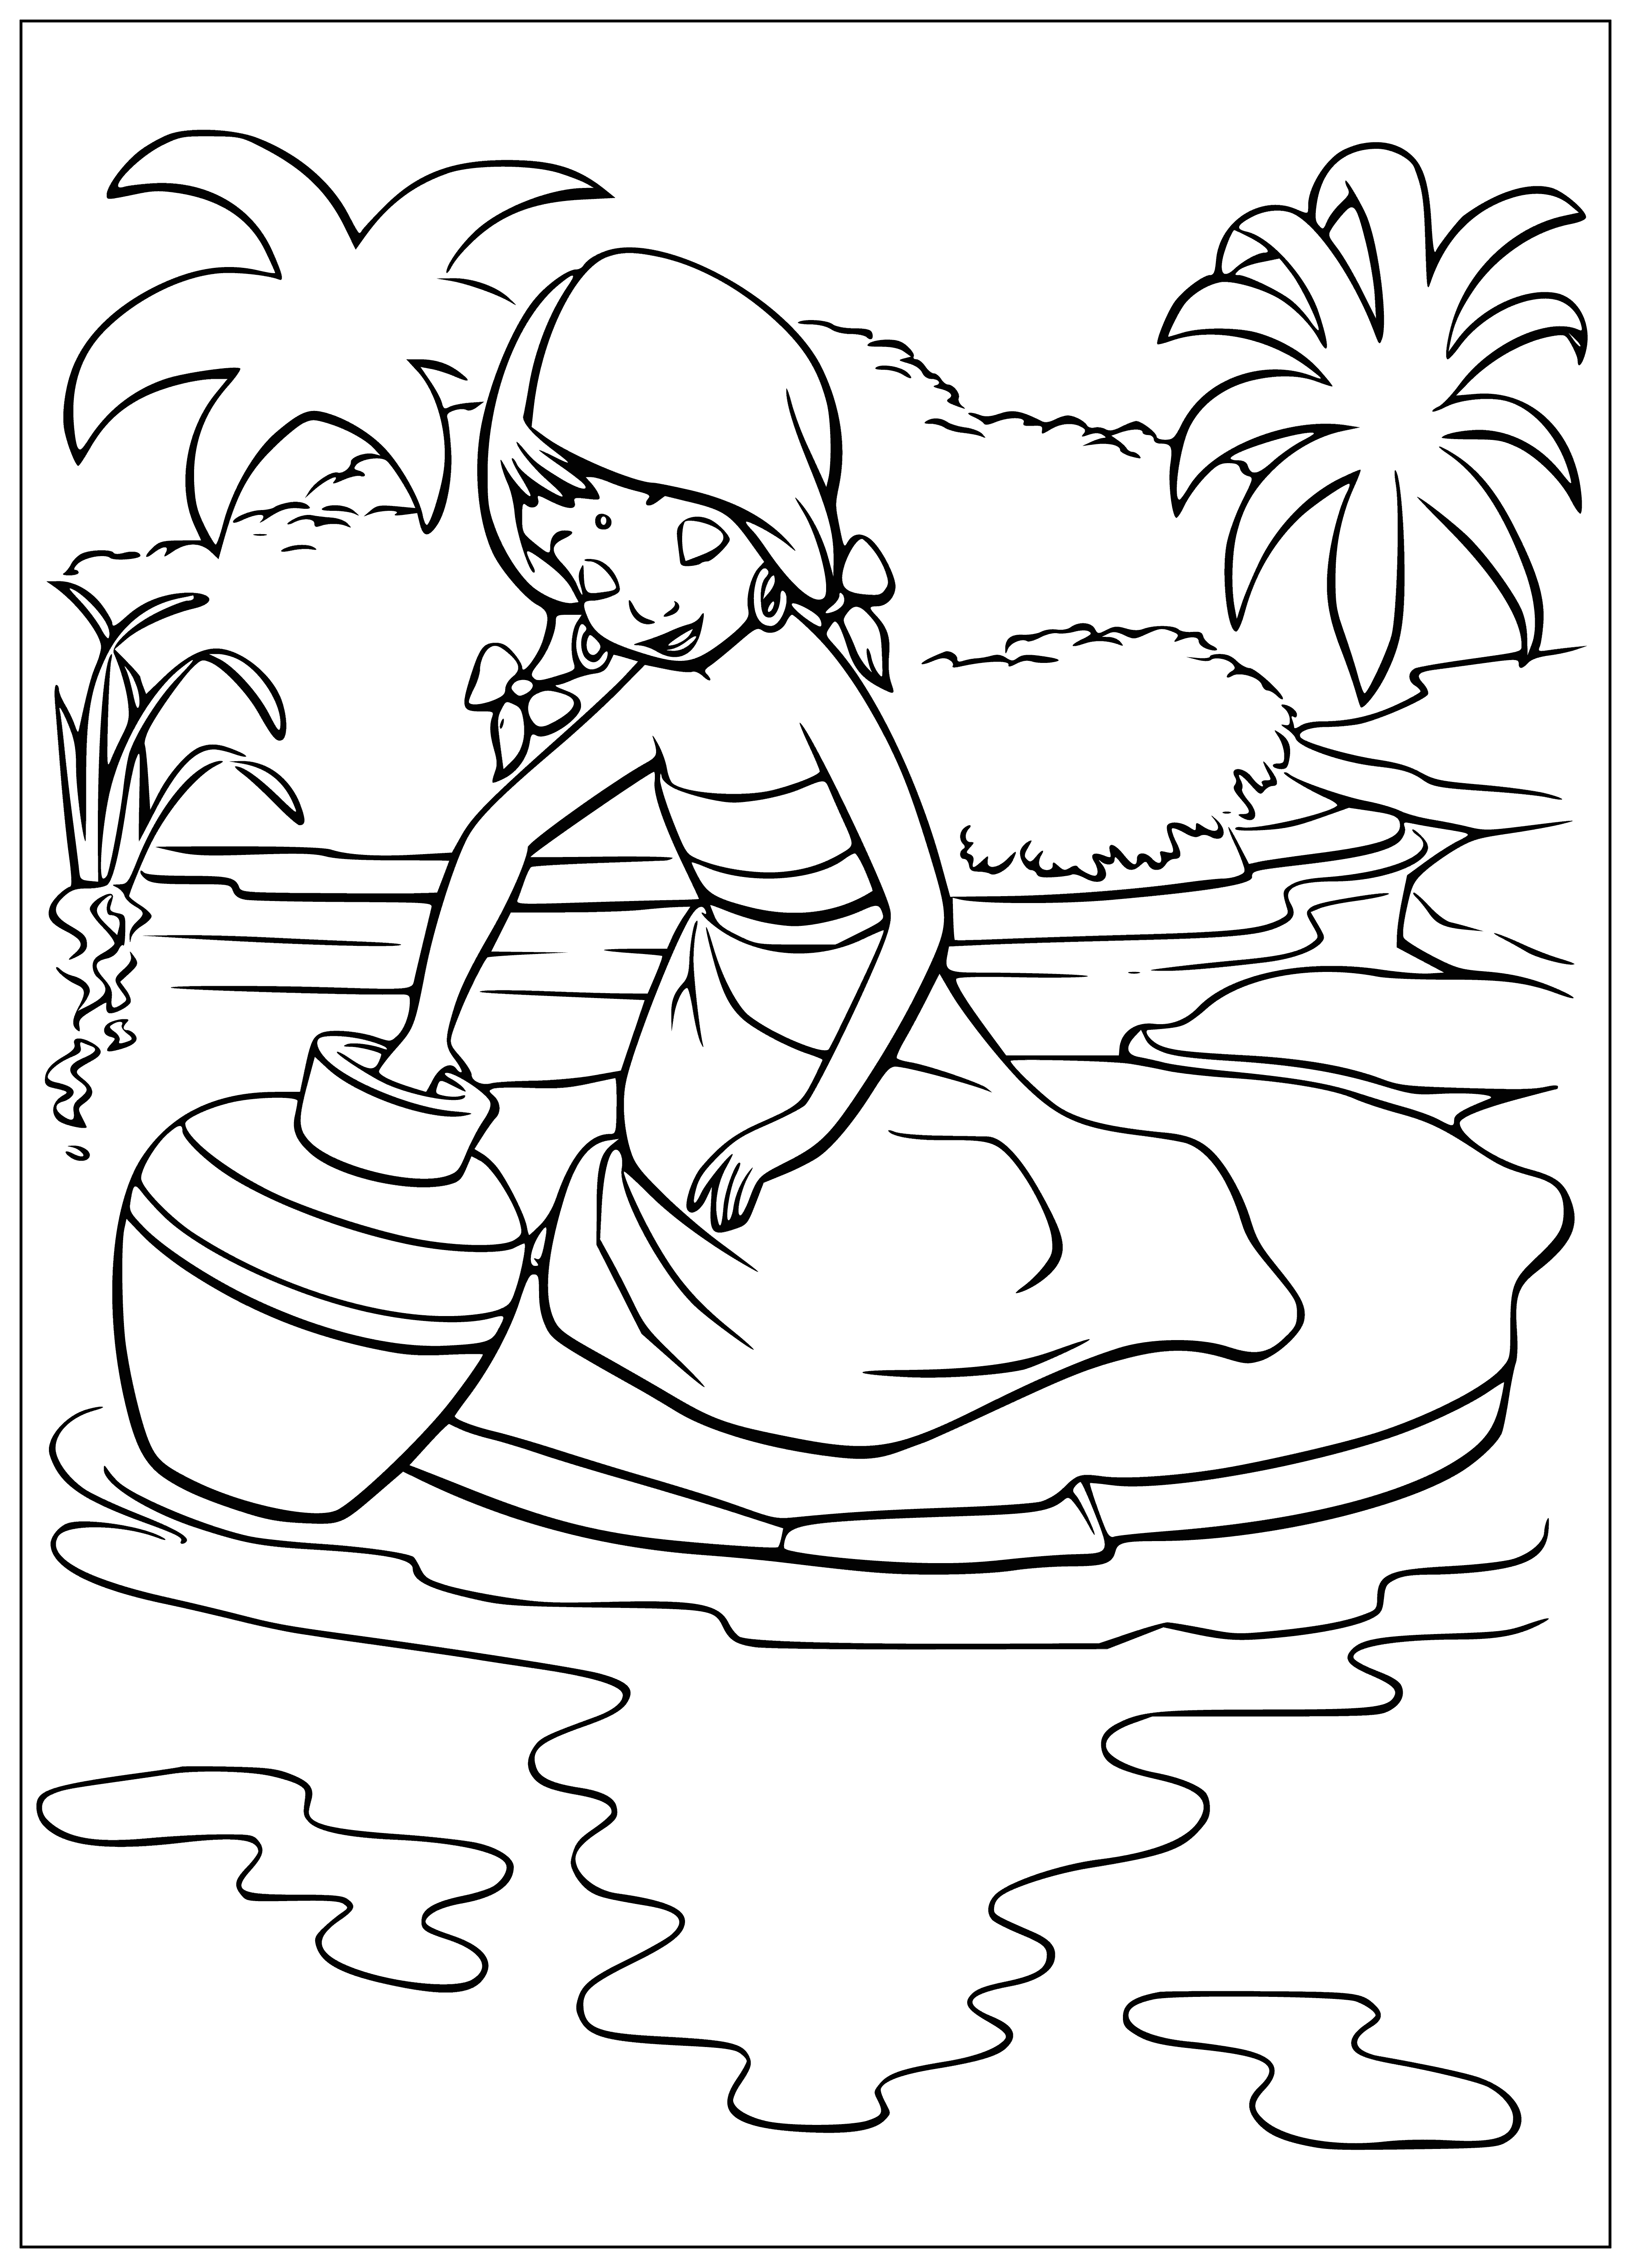 For water coloring page